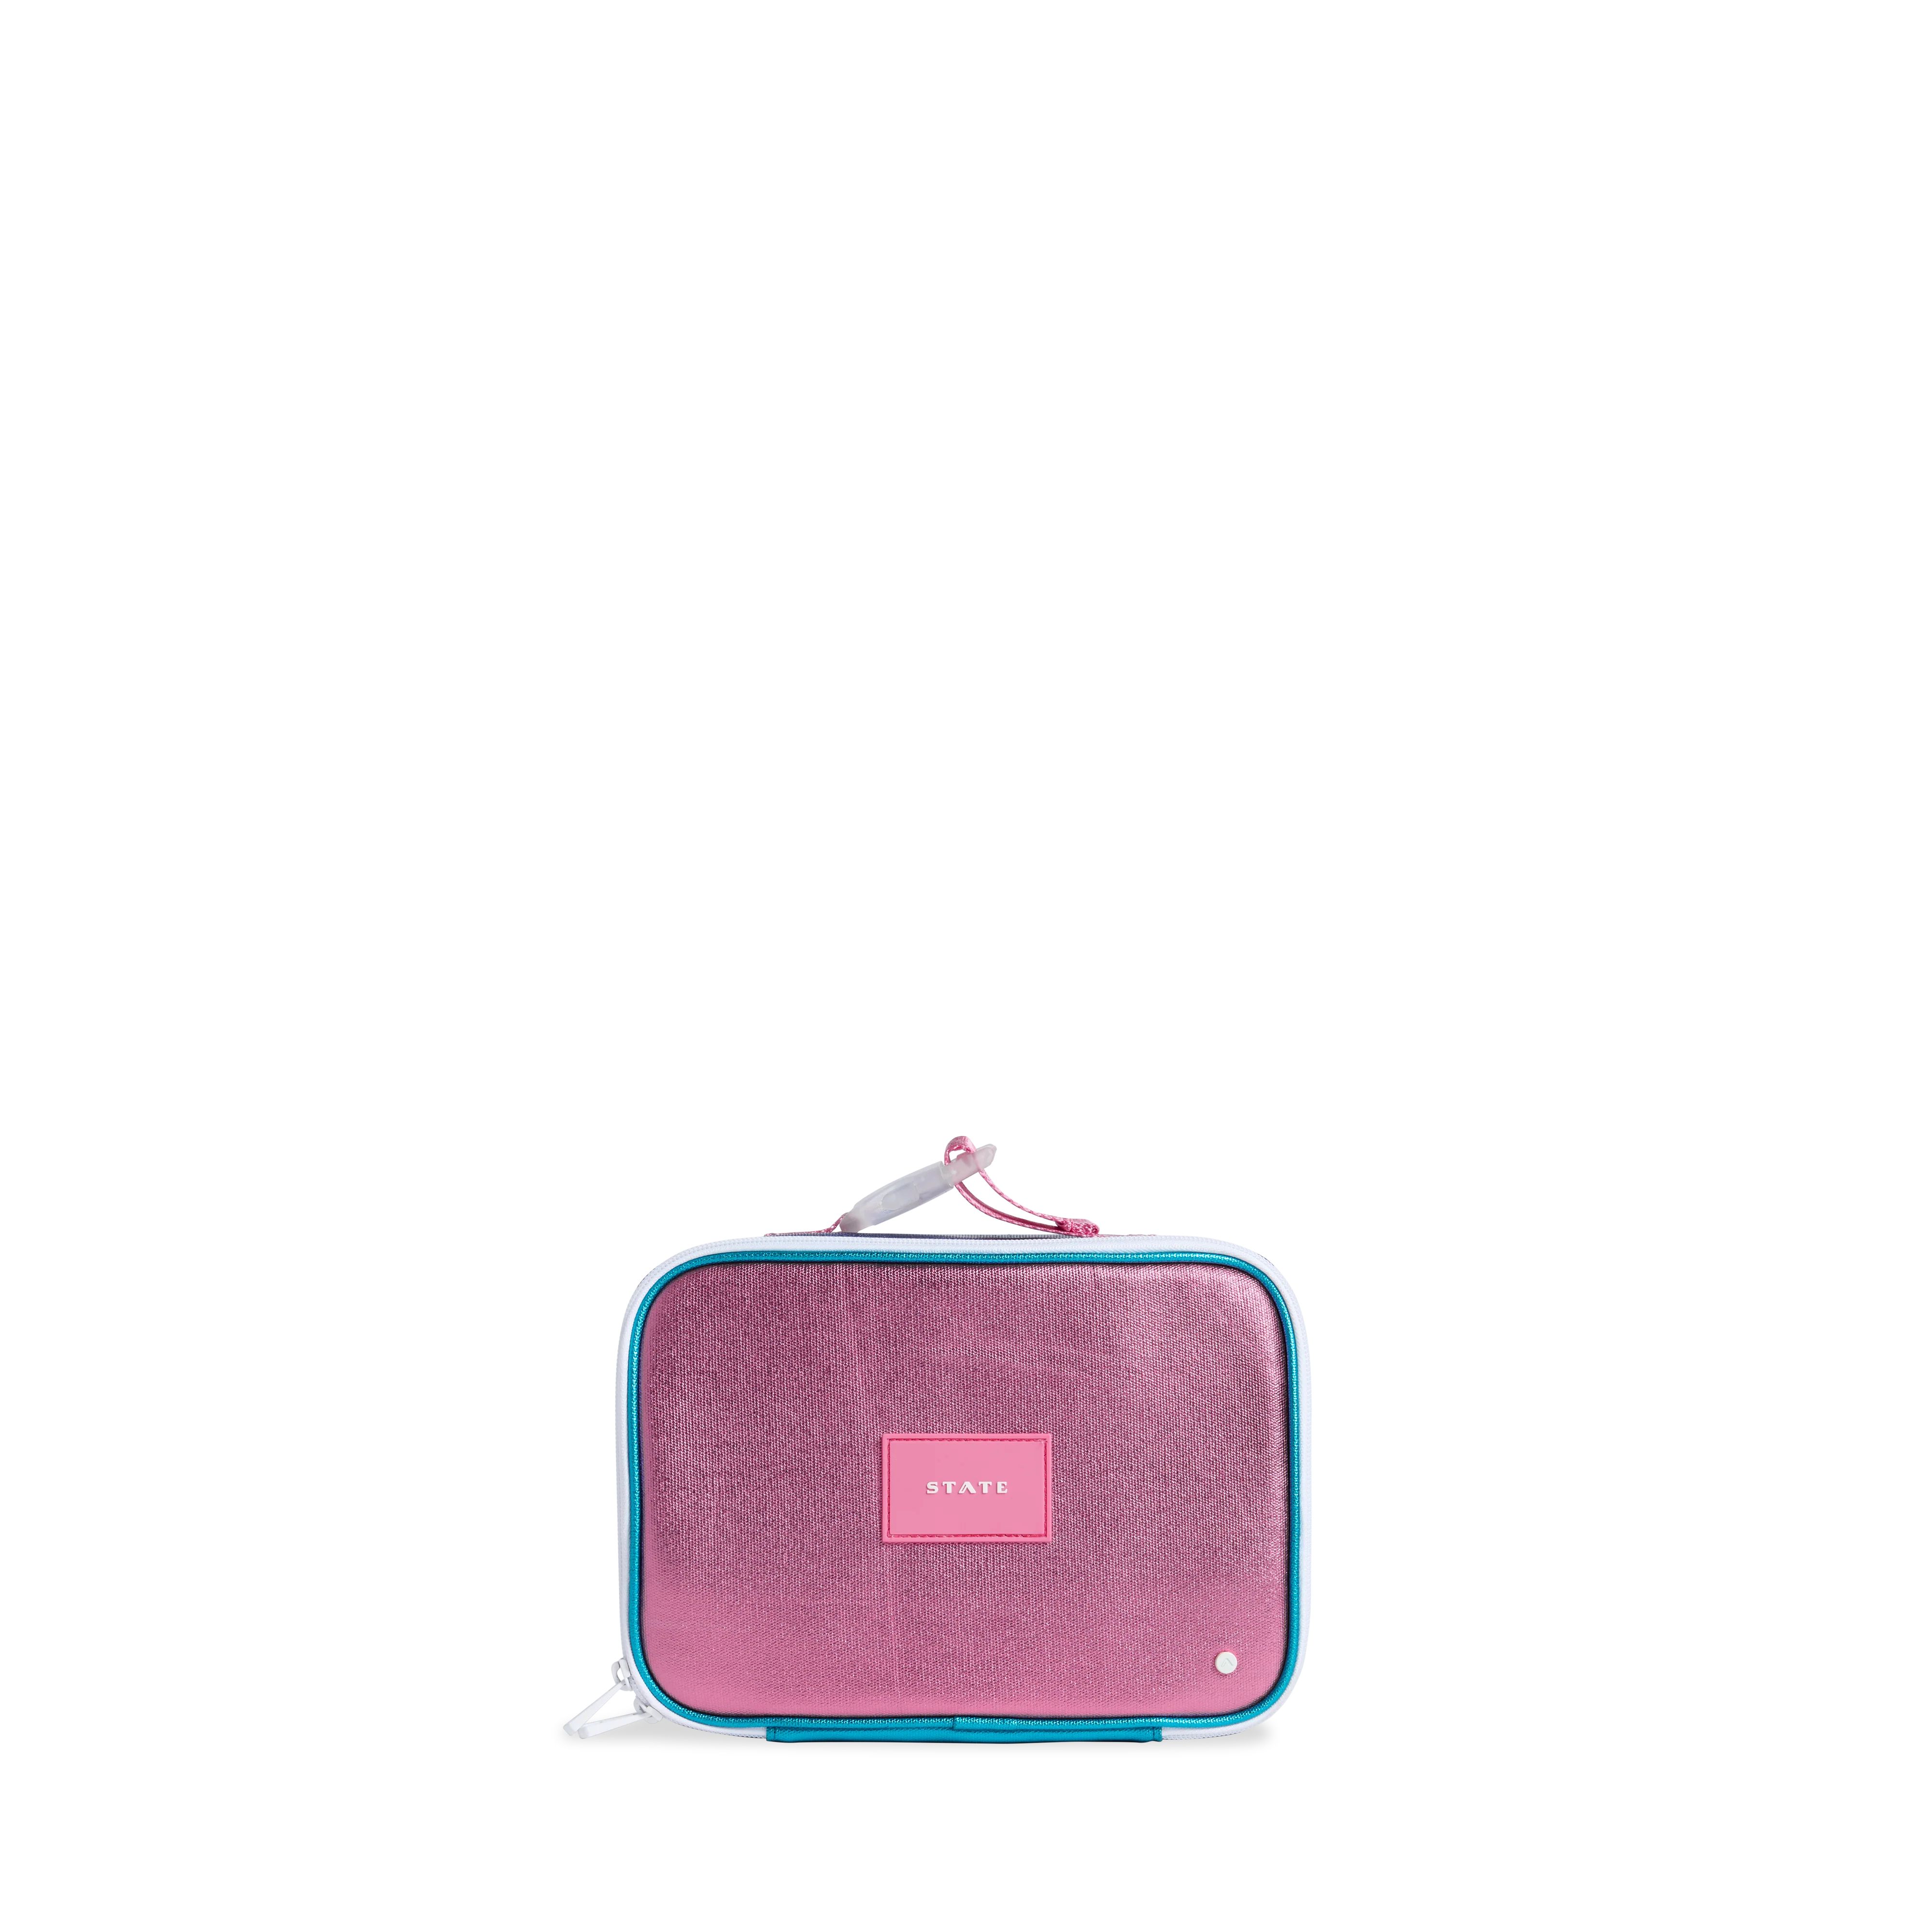 STATE Bags | Rodgers Lunch Box Metallic Turquoise/Hot Pink | STATE Bags